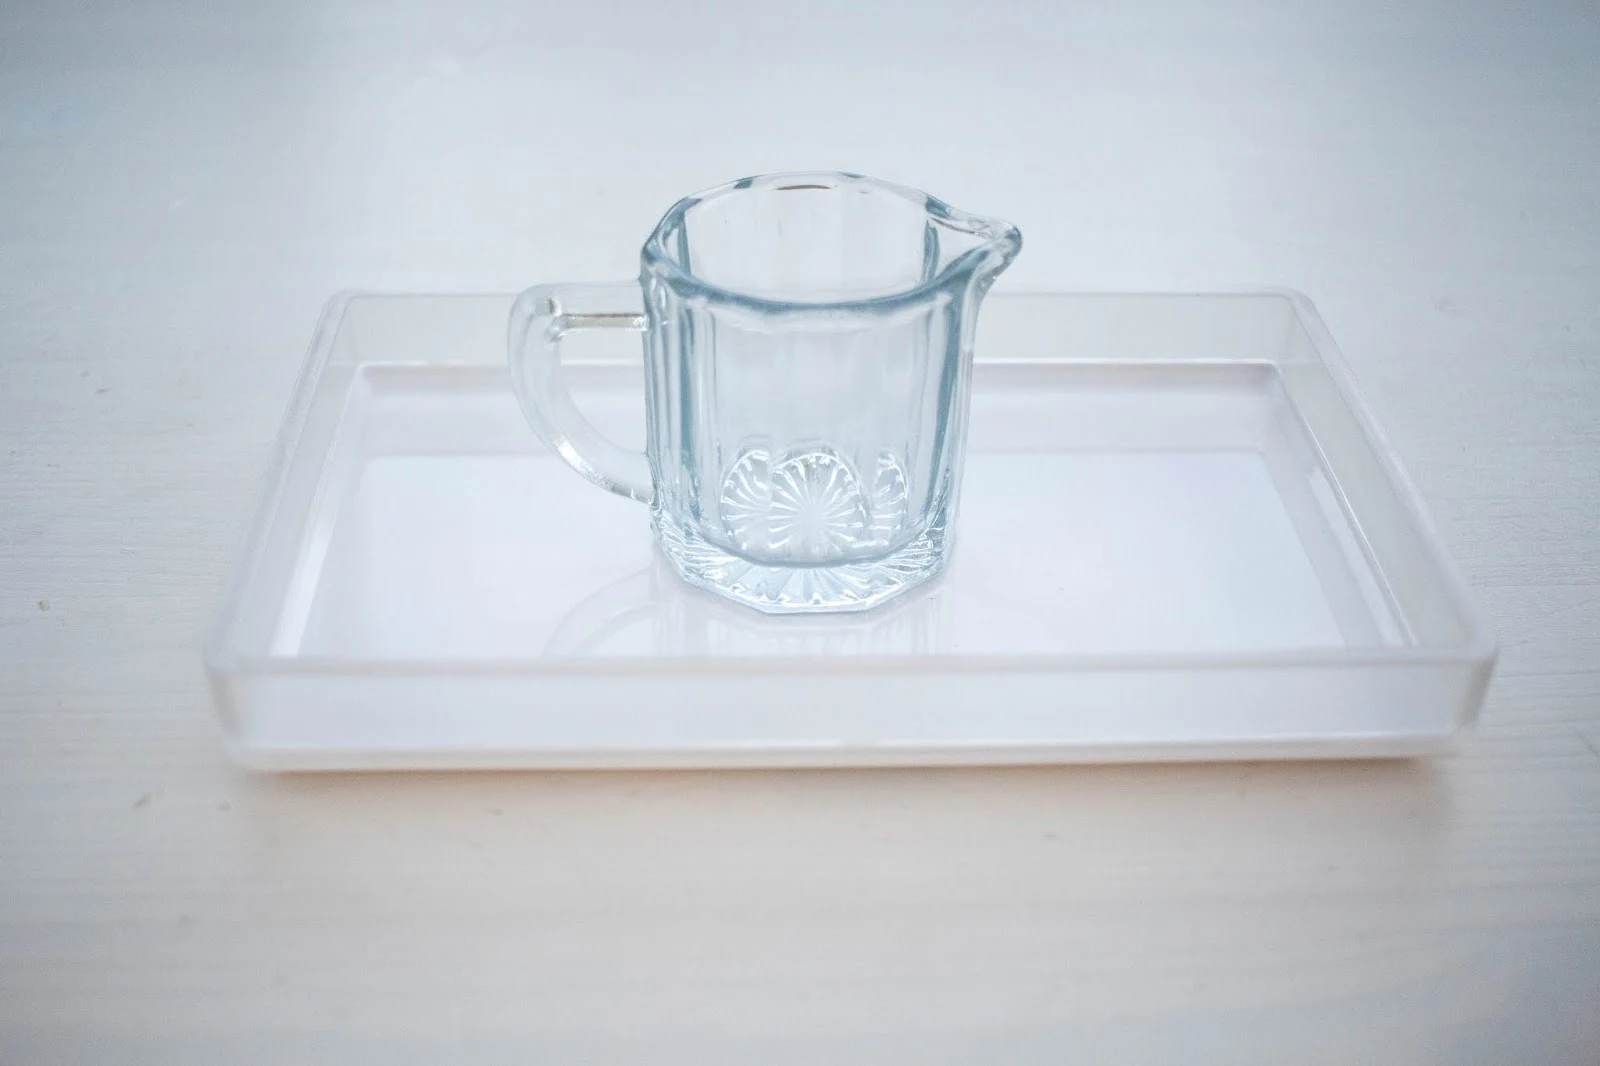 Making water available - pitcher options for a Montessori home.